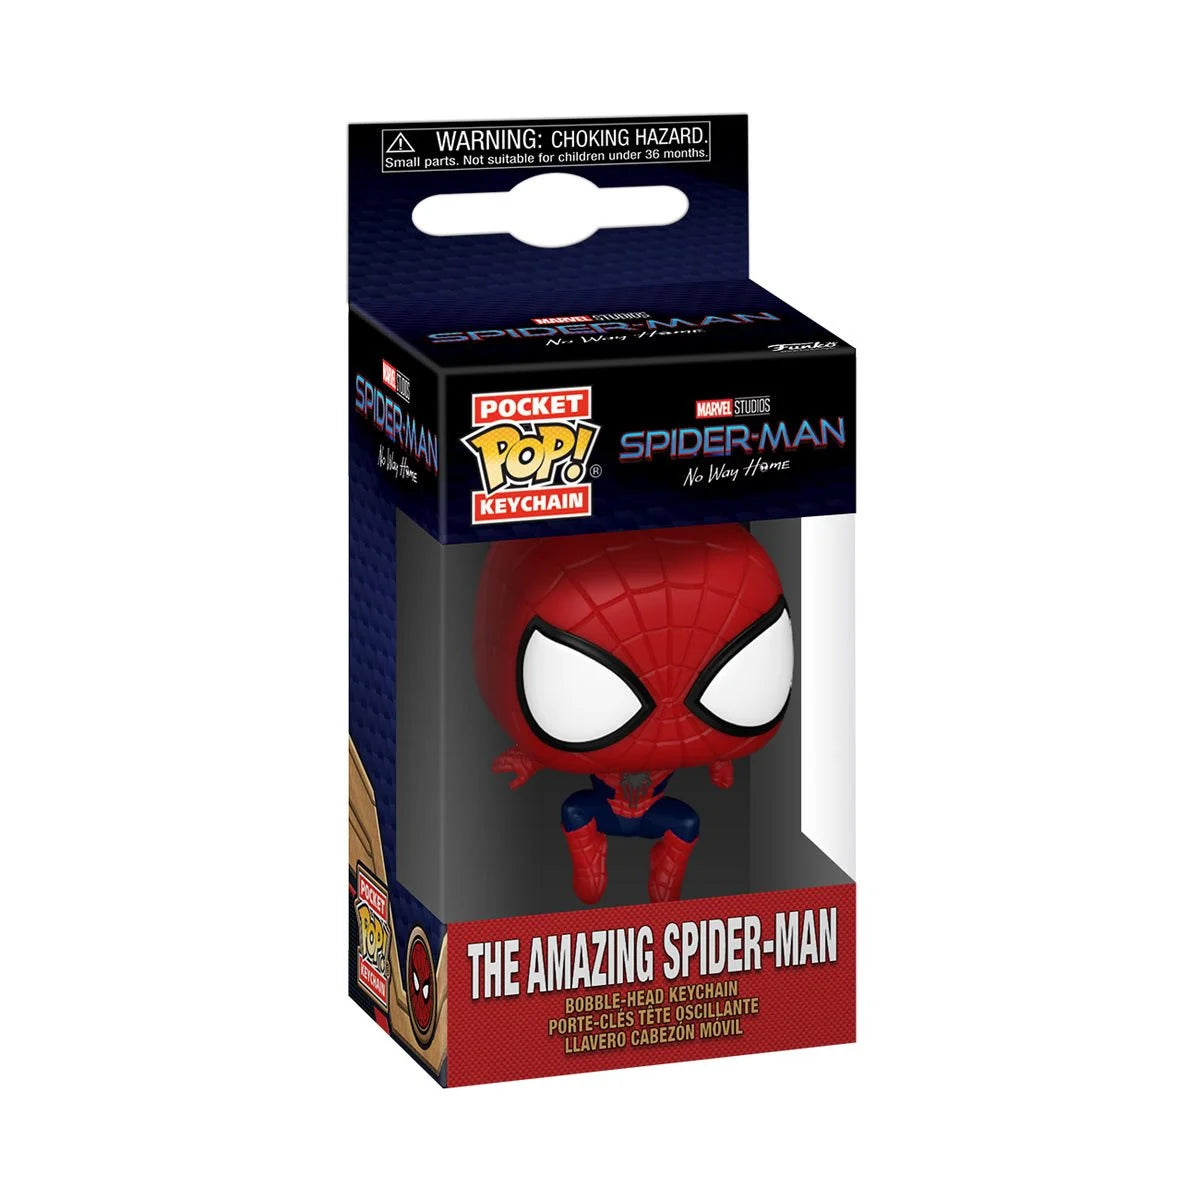 The Amazing Spider-Man No Way Home Leaping Pocket Pop! Key Chain